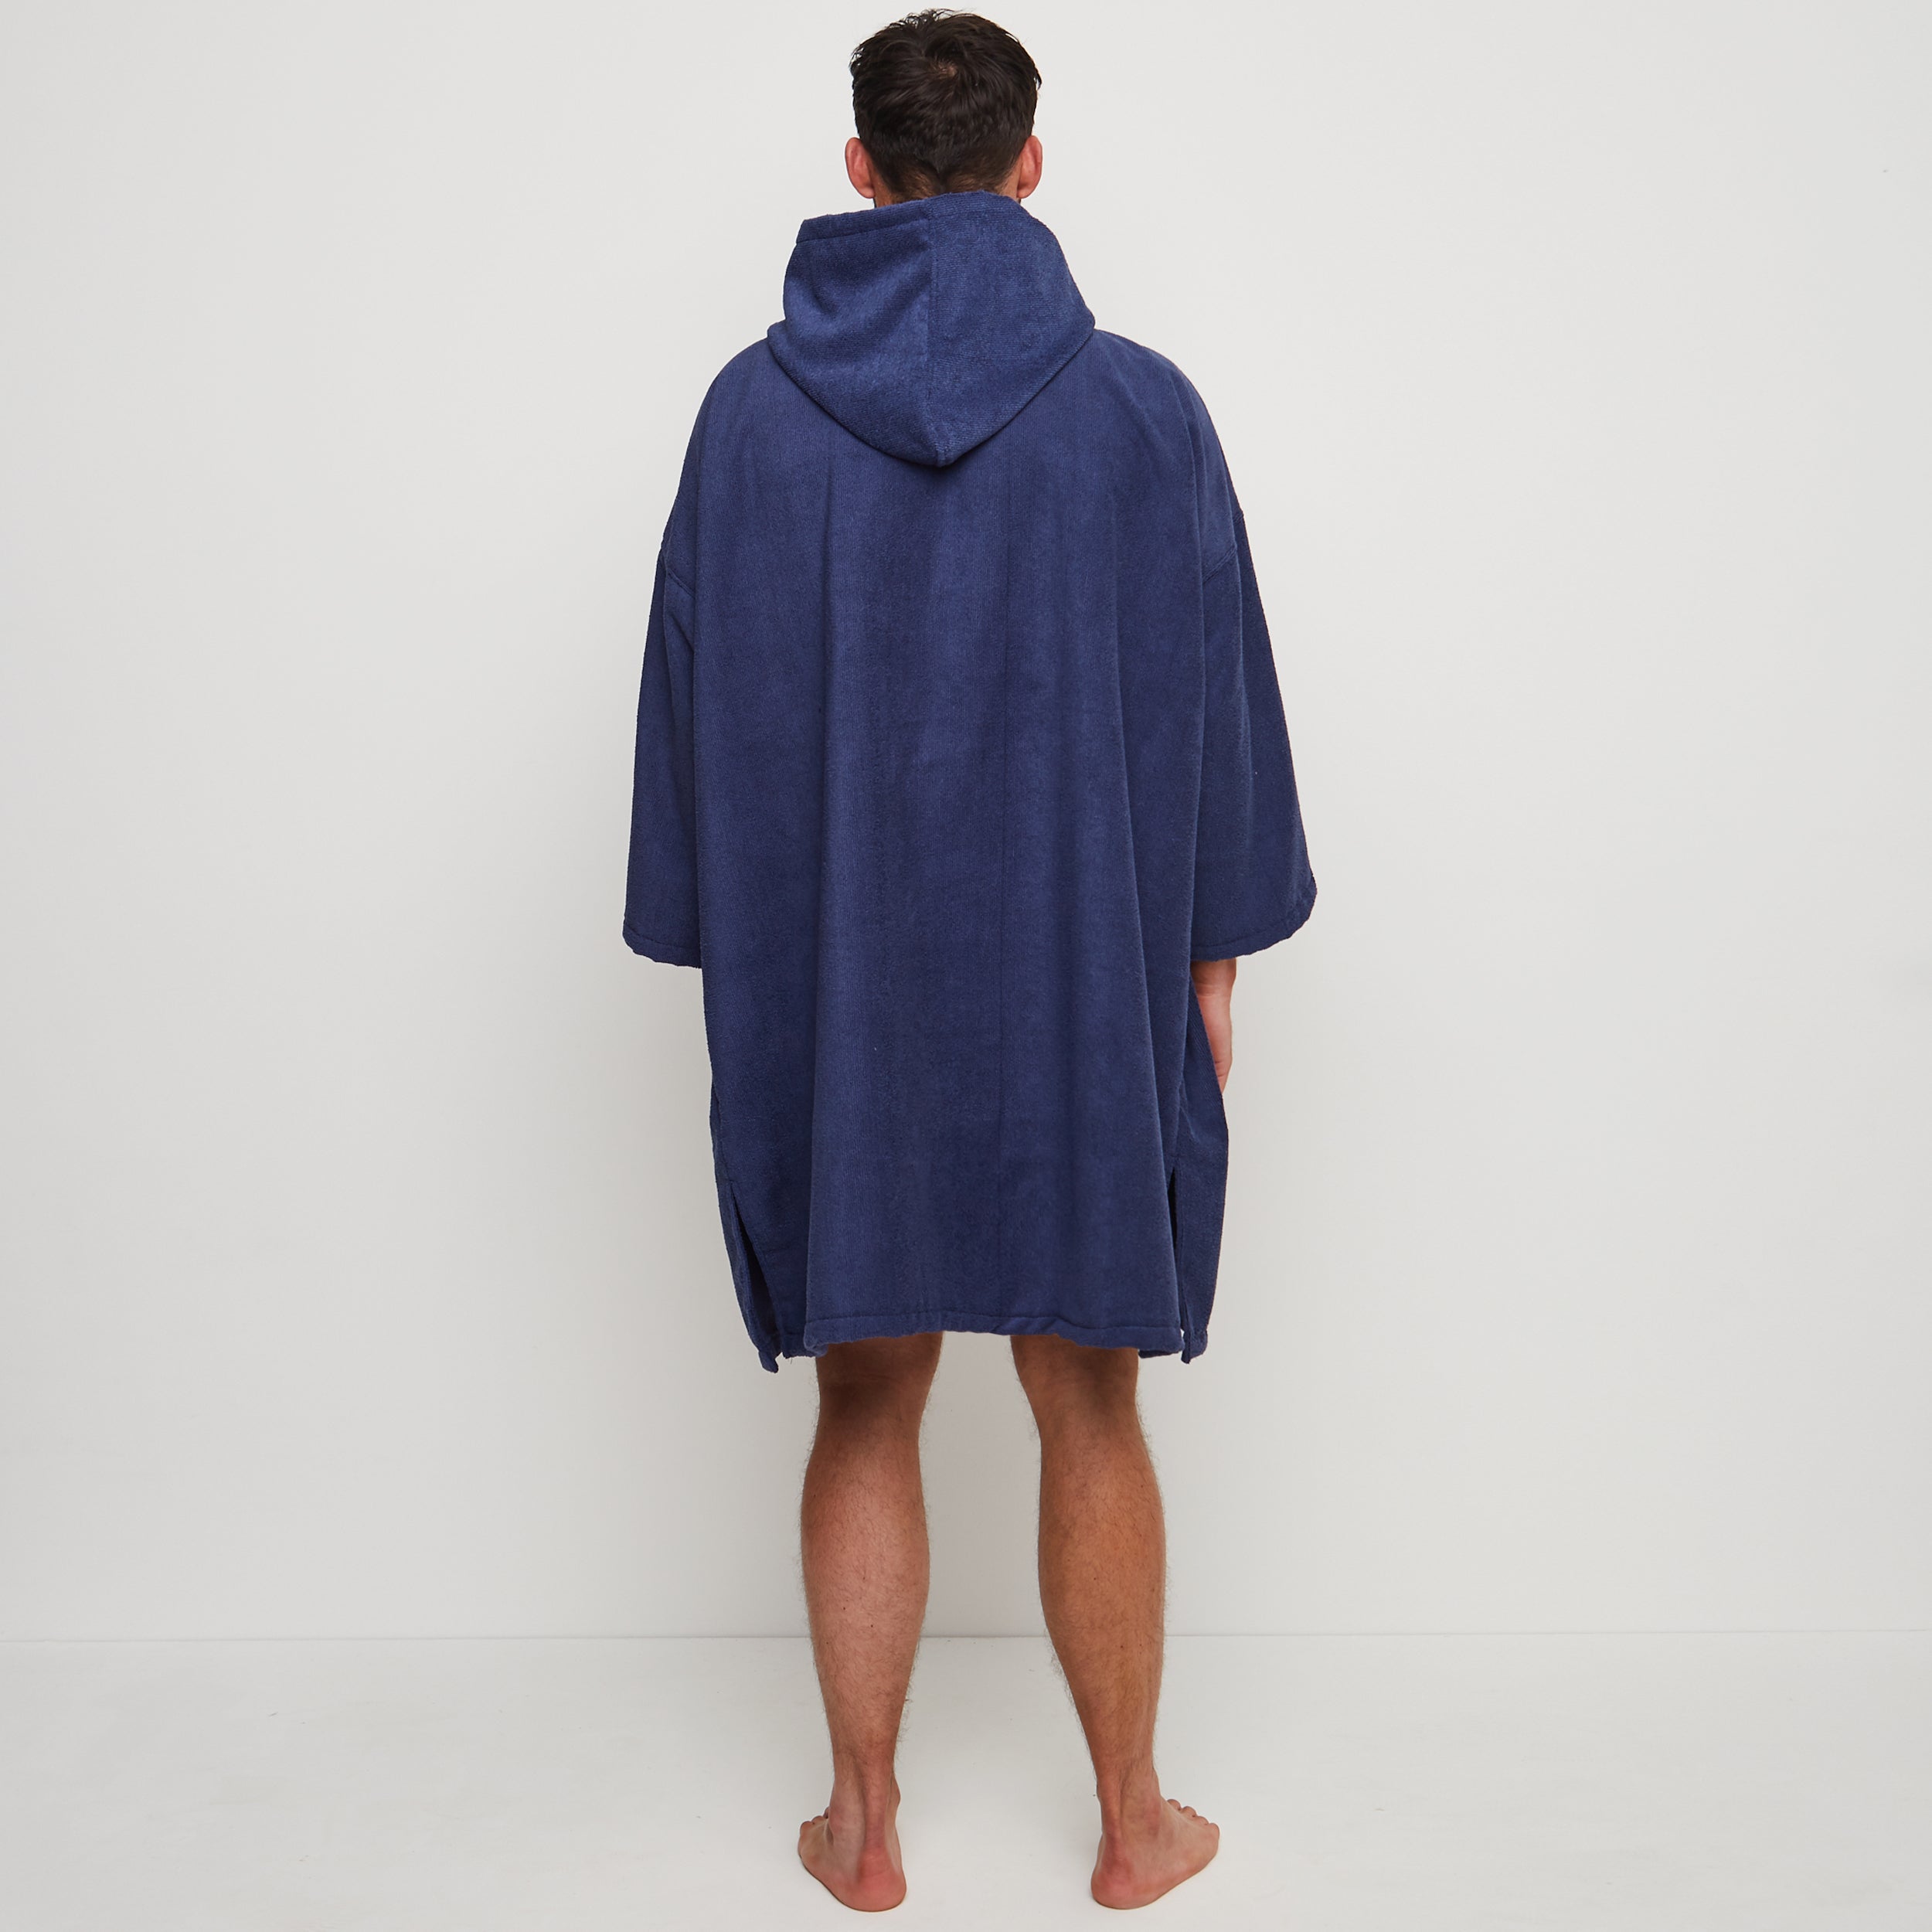 Towel Poncho | Royal Blue - Wave Sups Inflatable Paddle boards